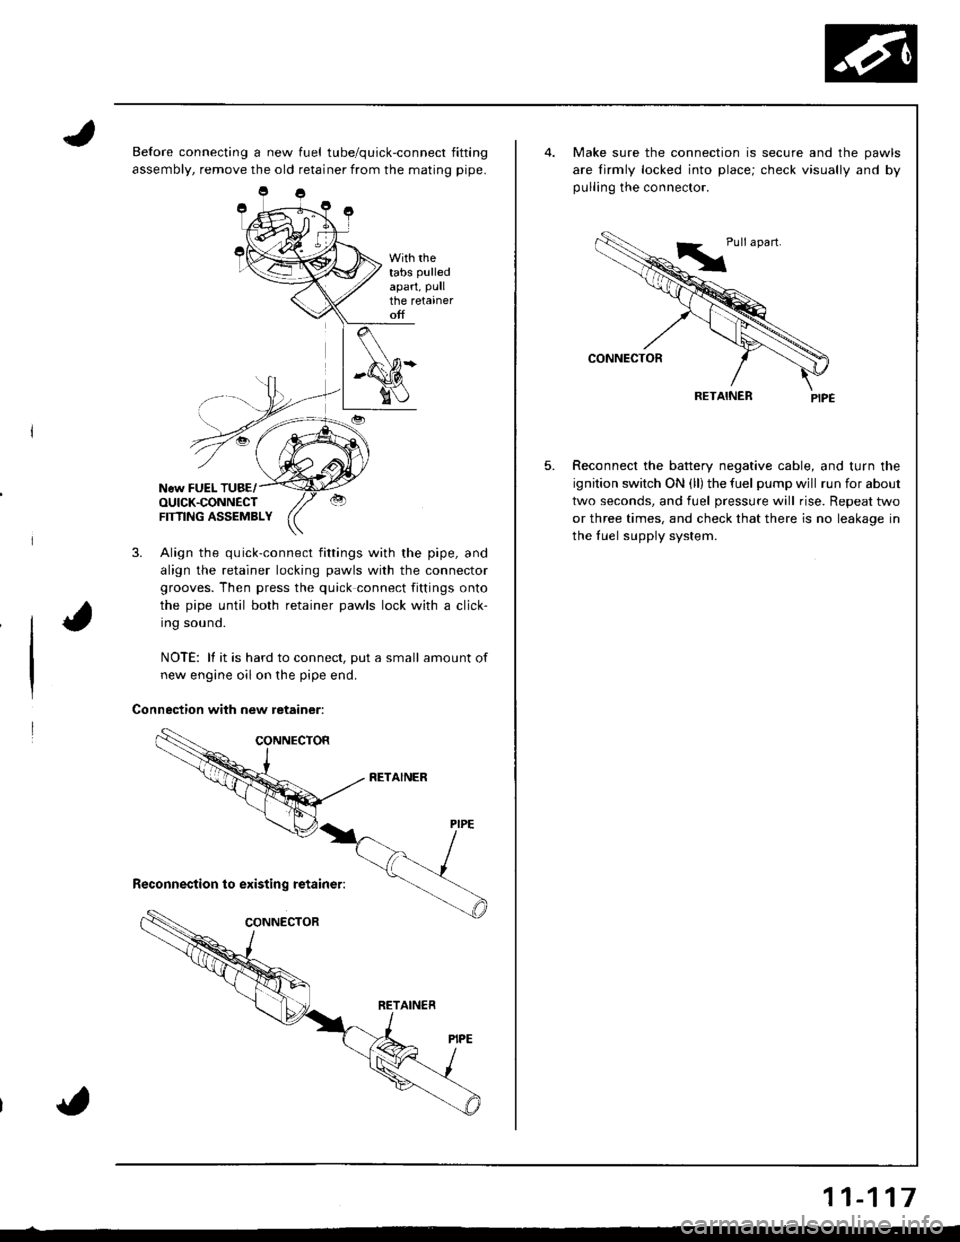 HONDA INTEGRA 1998 4.G Workshop Manual Before connecting a new fuel tube/quick-connect fitting
assembly, remove the old retainer from the mating pipe.
With rhetabs pulled
apart, Pullthe retaineroff
New FUEL TUBE/OUICK.CONNECTFTflNG ASSEMBL